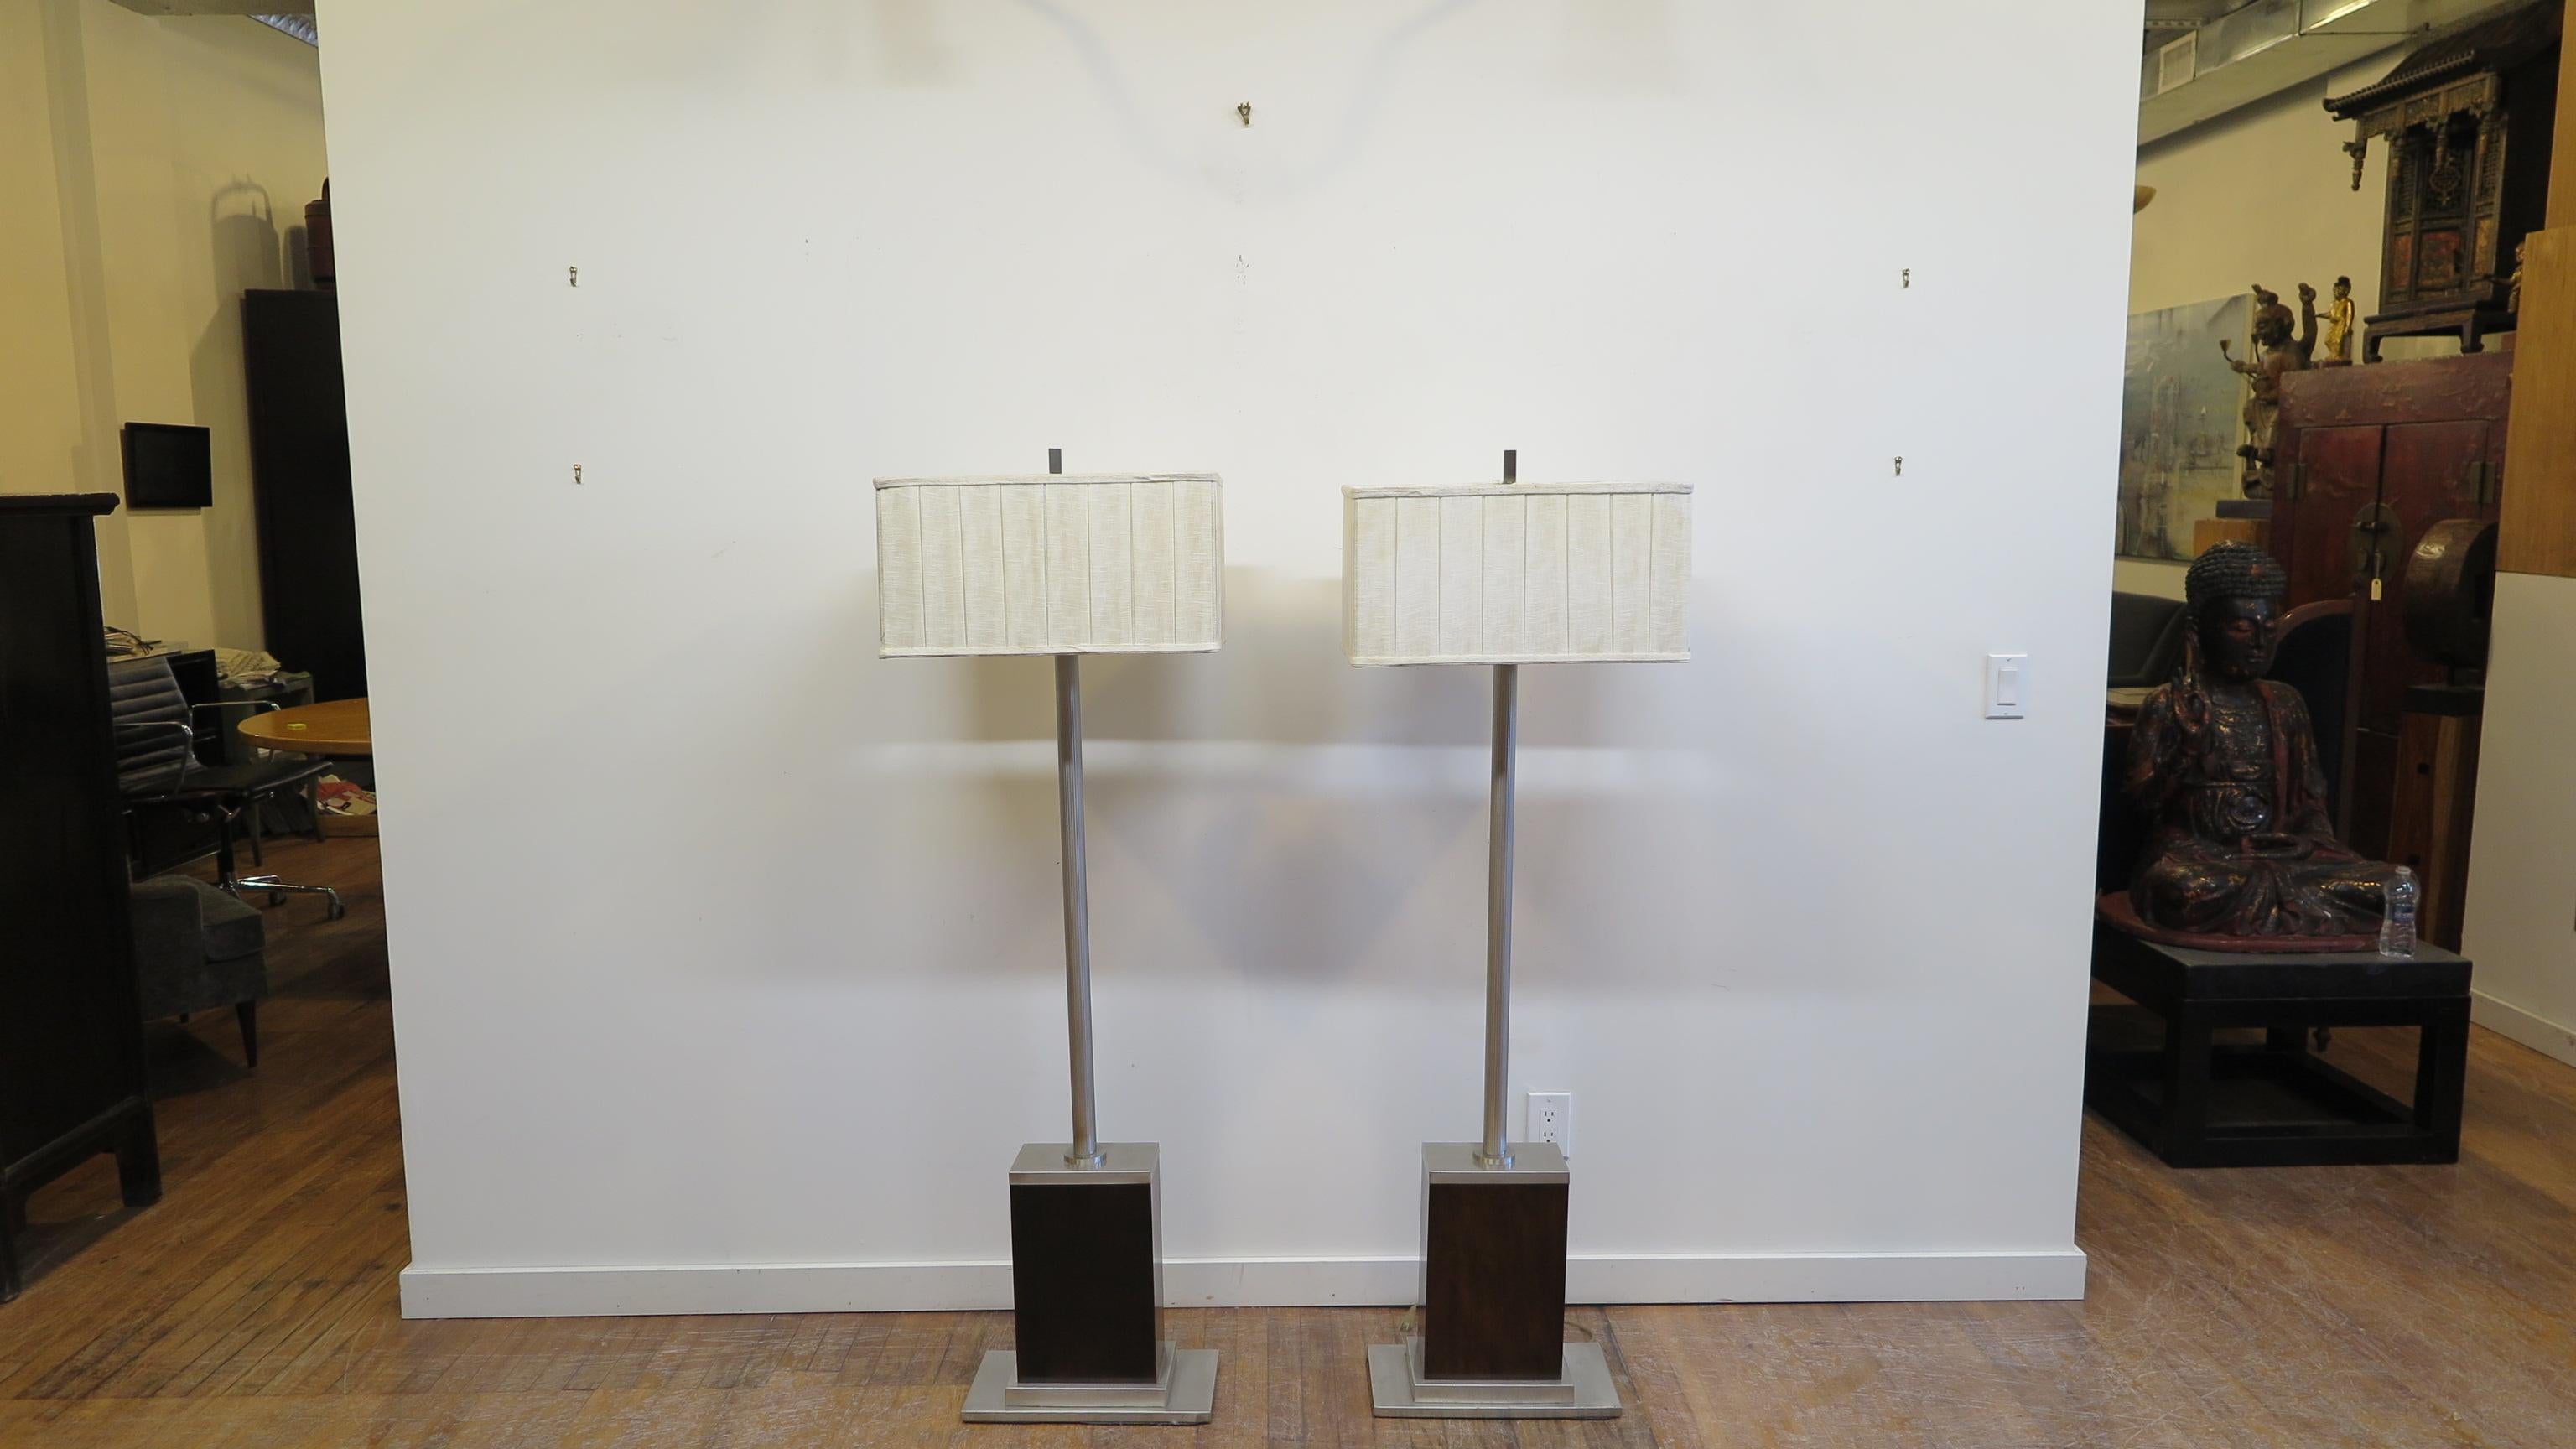 Pair of Art Deco style floor lamps. Brushed aluminum, poles are reeded, set into large wood blocks on metal plinth bases. In good condition. Each lamp having two sockets. Lamps are heavy each weighing about 35lbs. In very good condition.  New shades